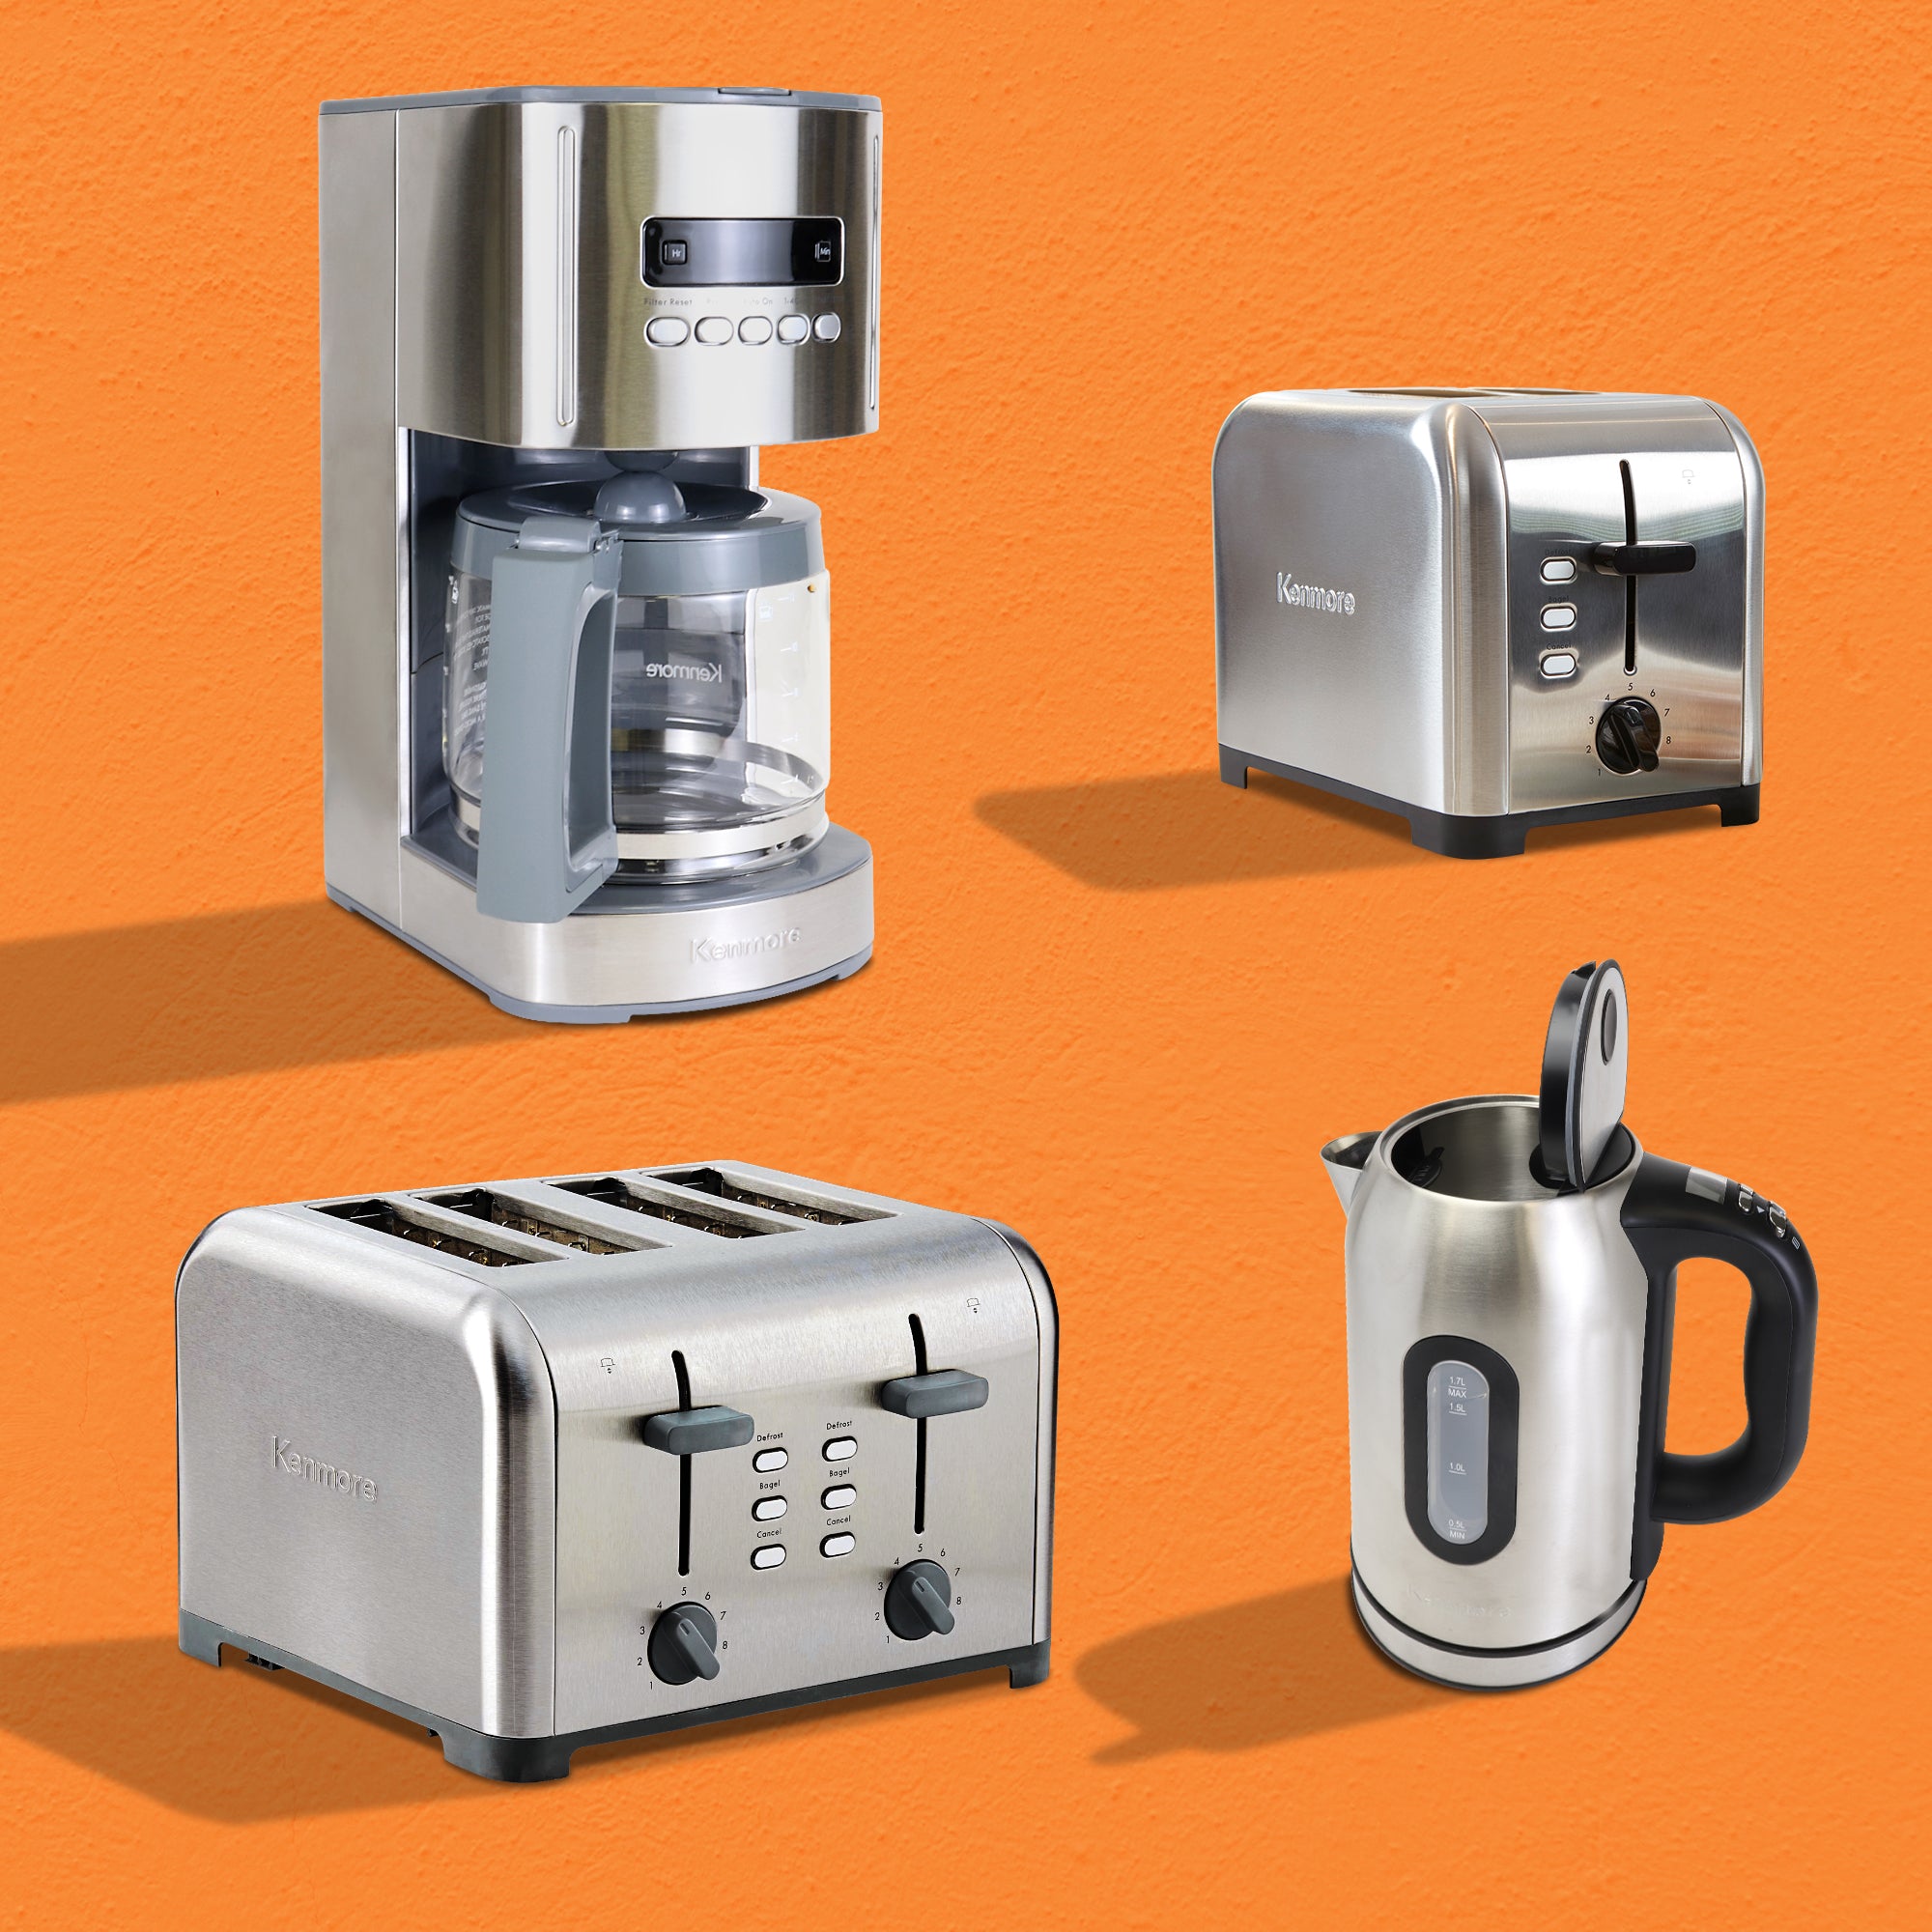 Four product shots on a vibrant orange background show matching Kenmore small appliances: 12-Cup Programmable Coffee Maker; 2-Slice Toaster; 4-Slice Toaster with Dual Controls; Programmable tea kettle